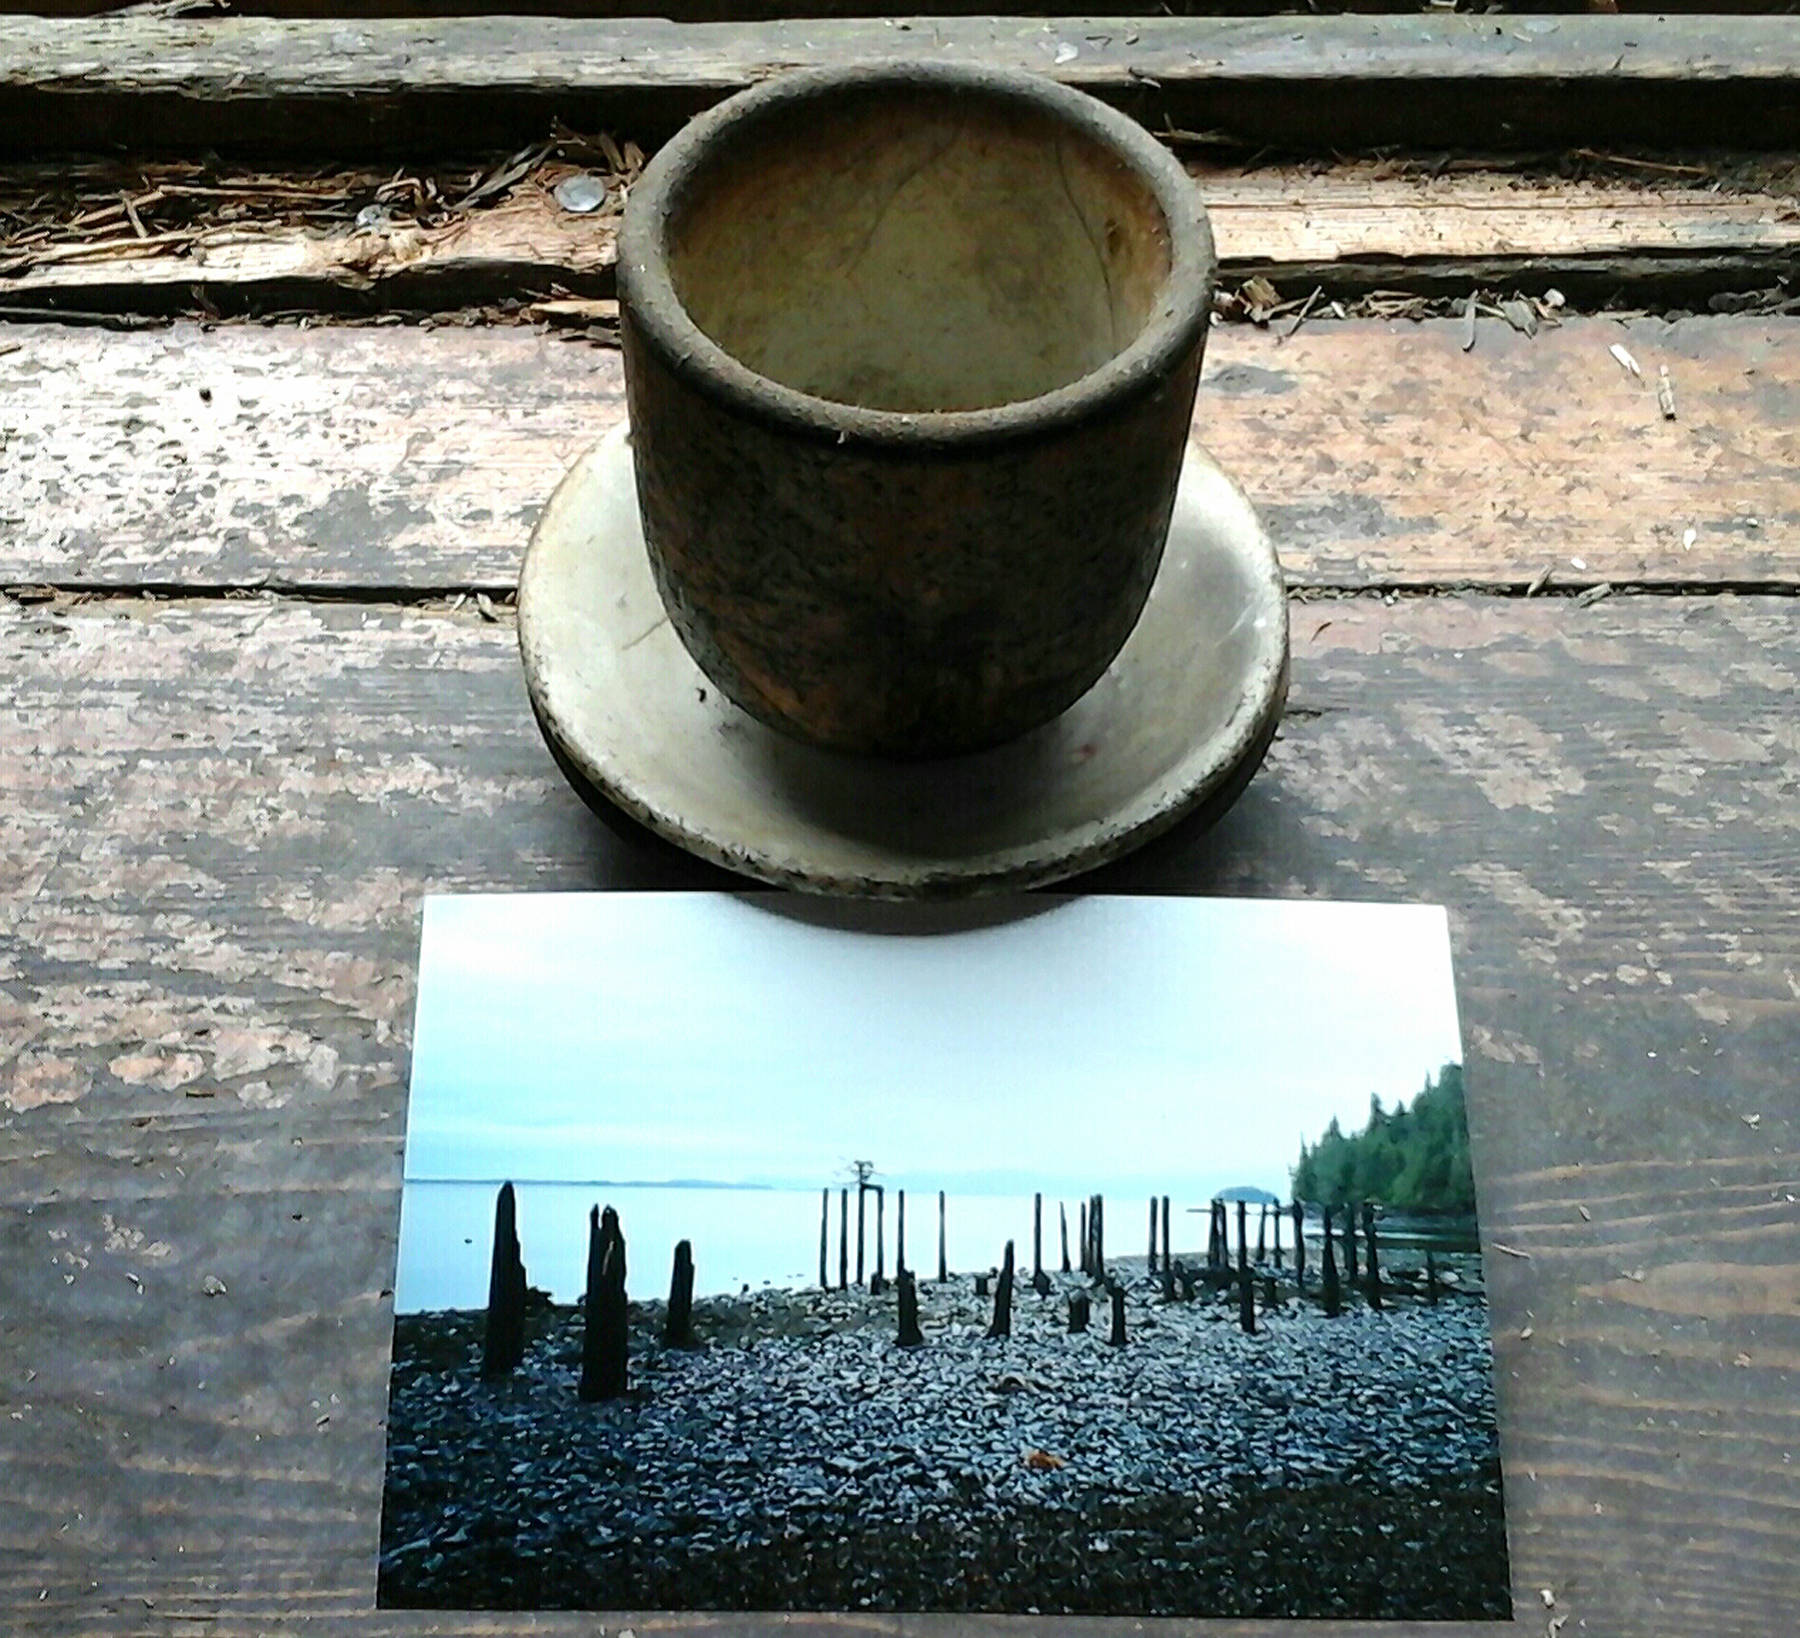 Pottery from the ruins of the cannery with a photo of the burned pilings that supported the cannery. Photo by Tara Neilson.